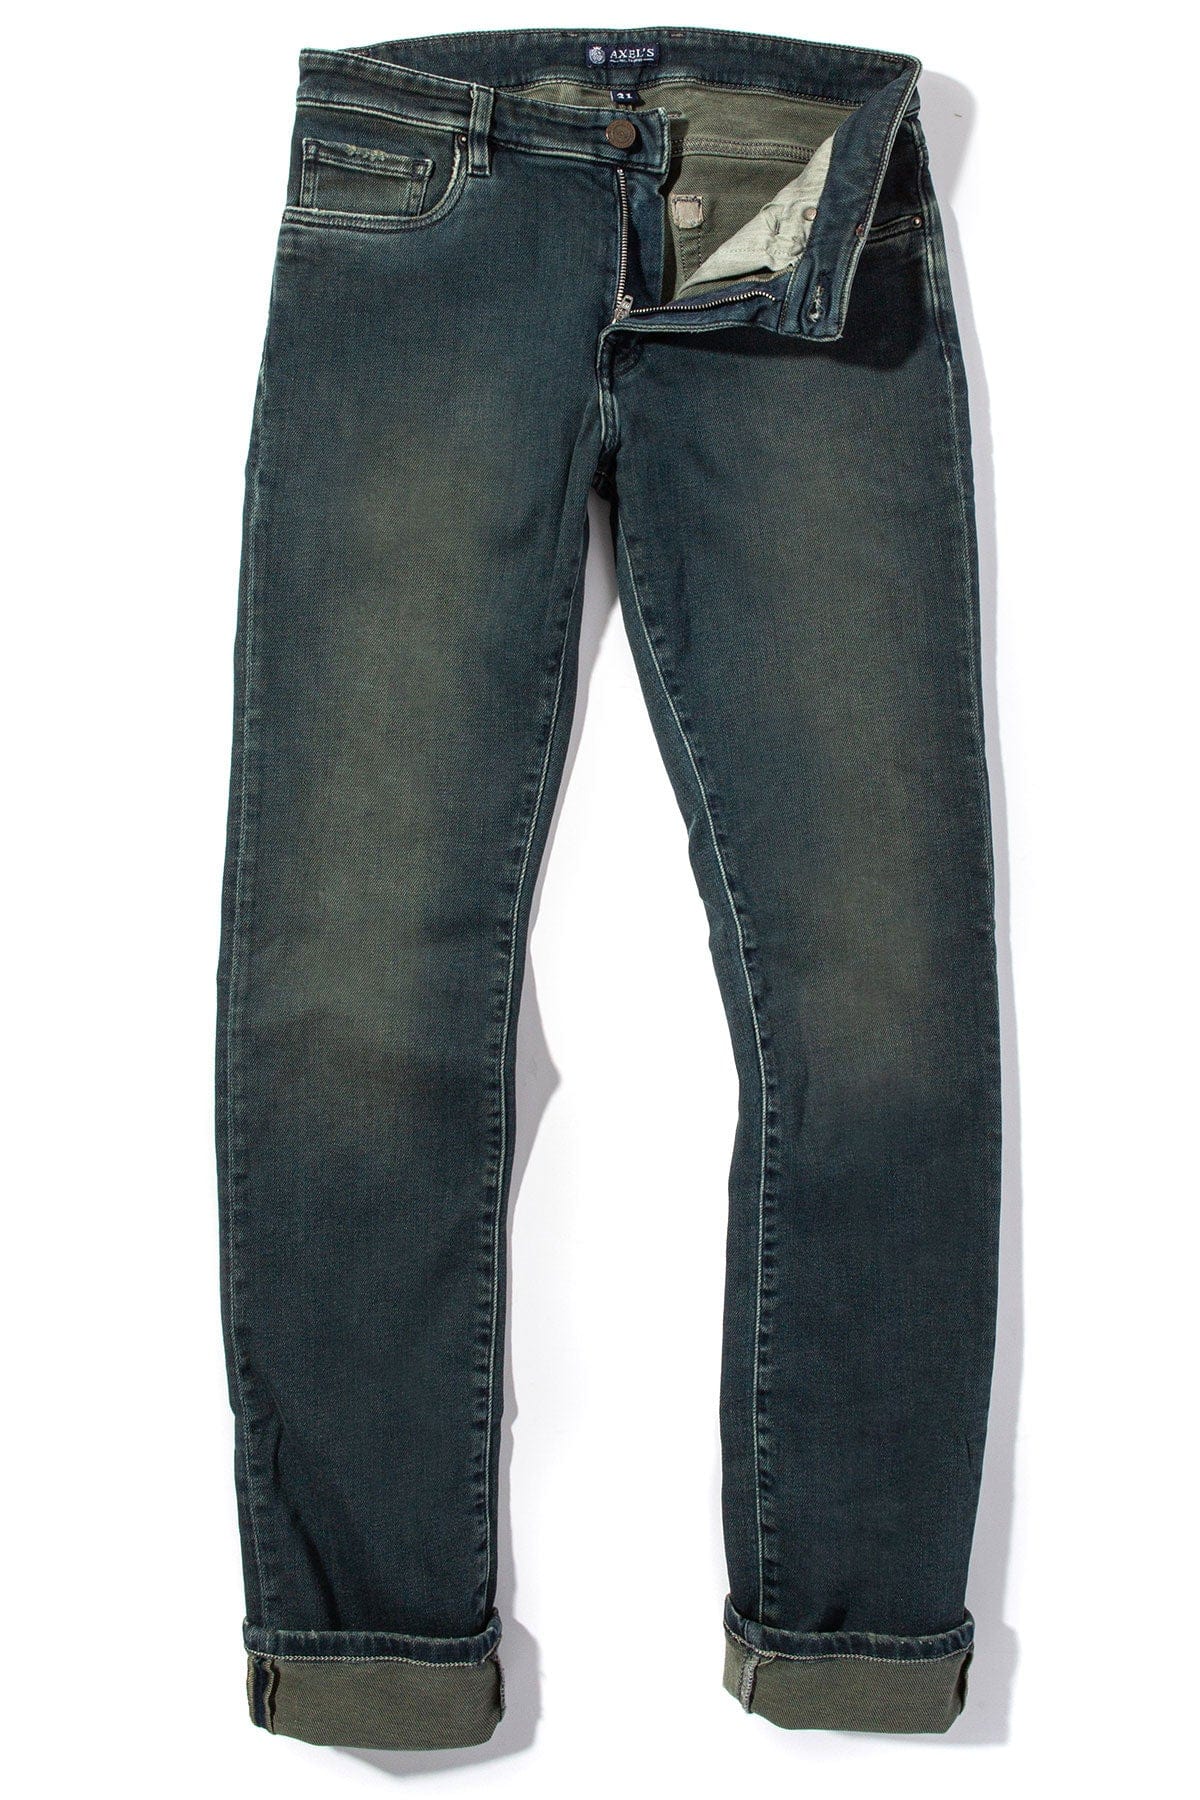 Waylon Over-Dyed Stretch Denim In Cactus - AXEL'S